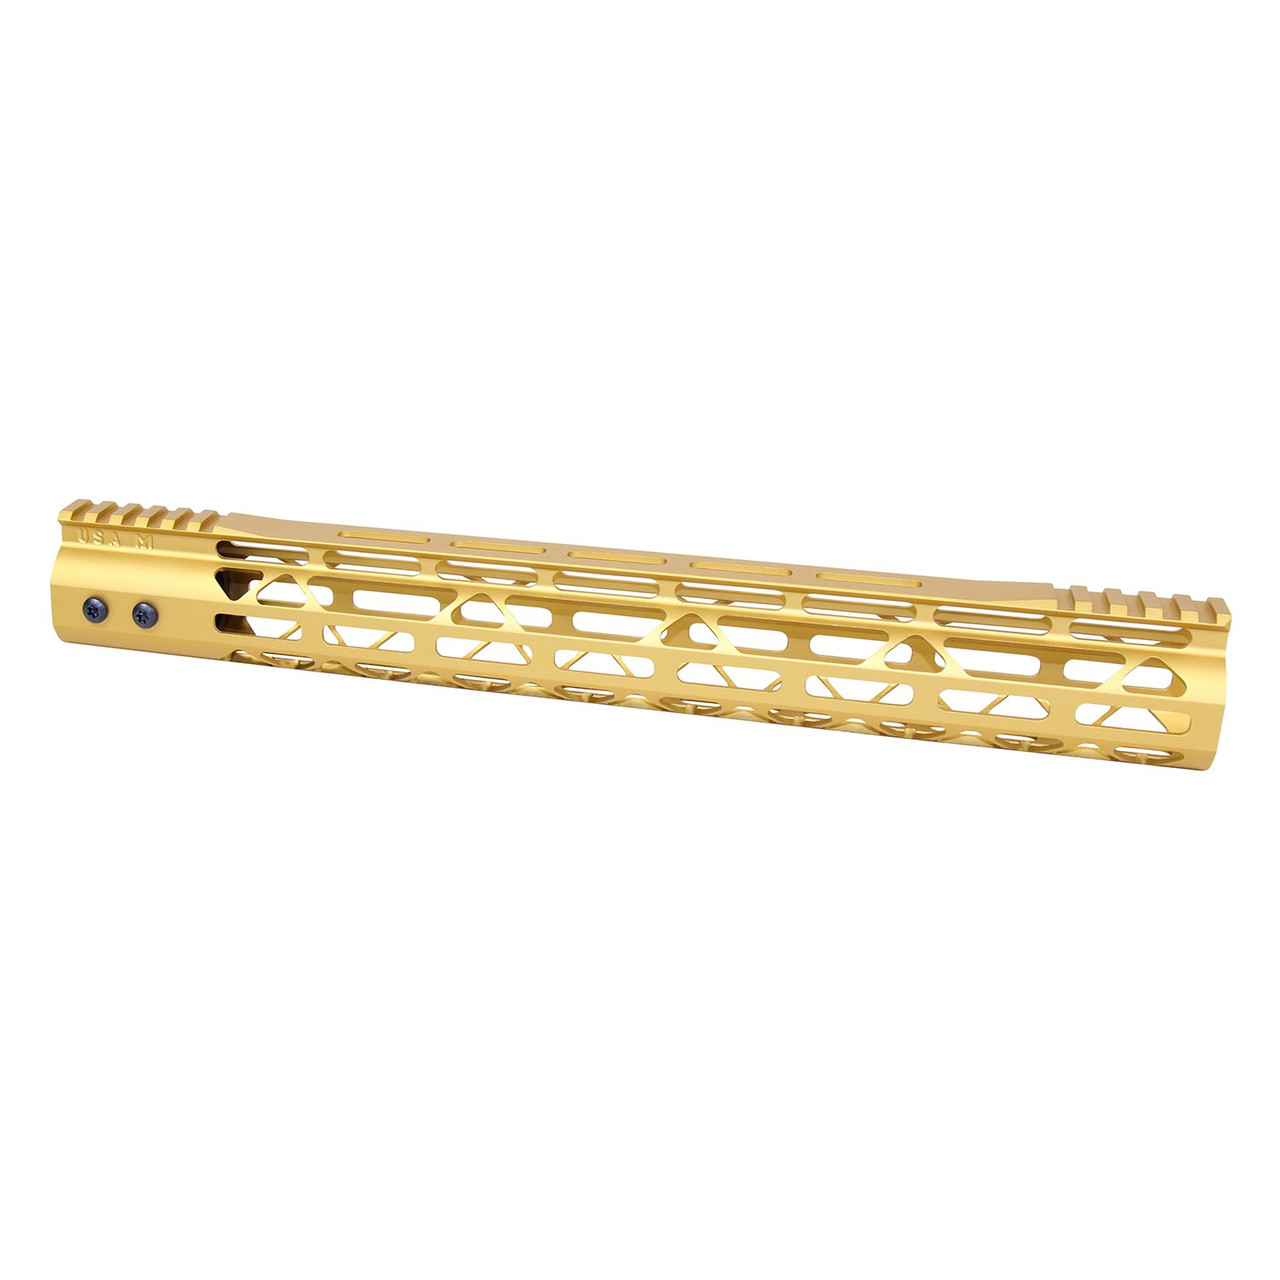 Guntec USA GT-15MDLTE-GOLD 15" MOD LITE Skeletonized  Series M-LOK Free Floating Handguard With Monolithic Top Rail (Anodized Gold)